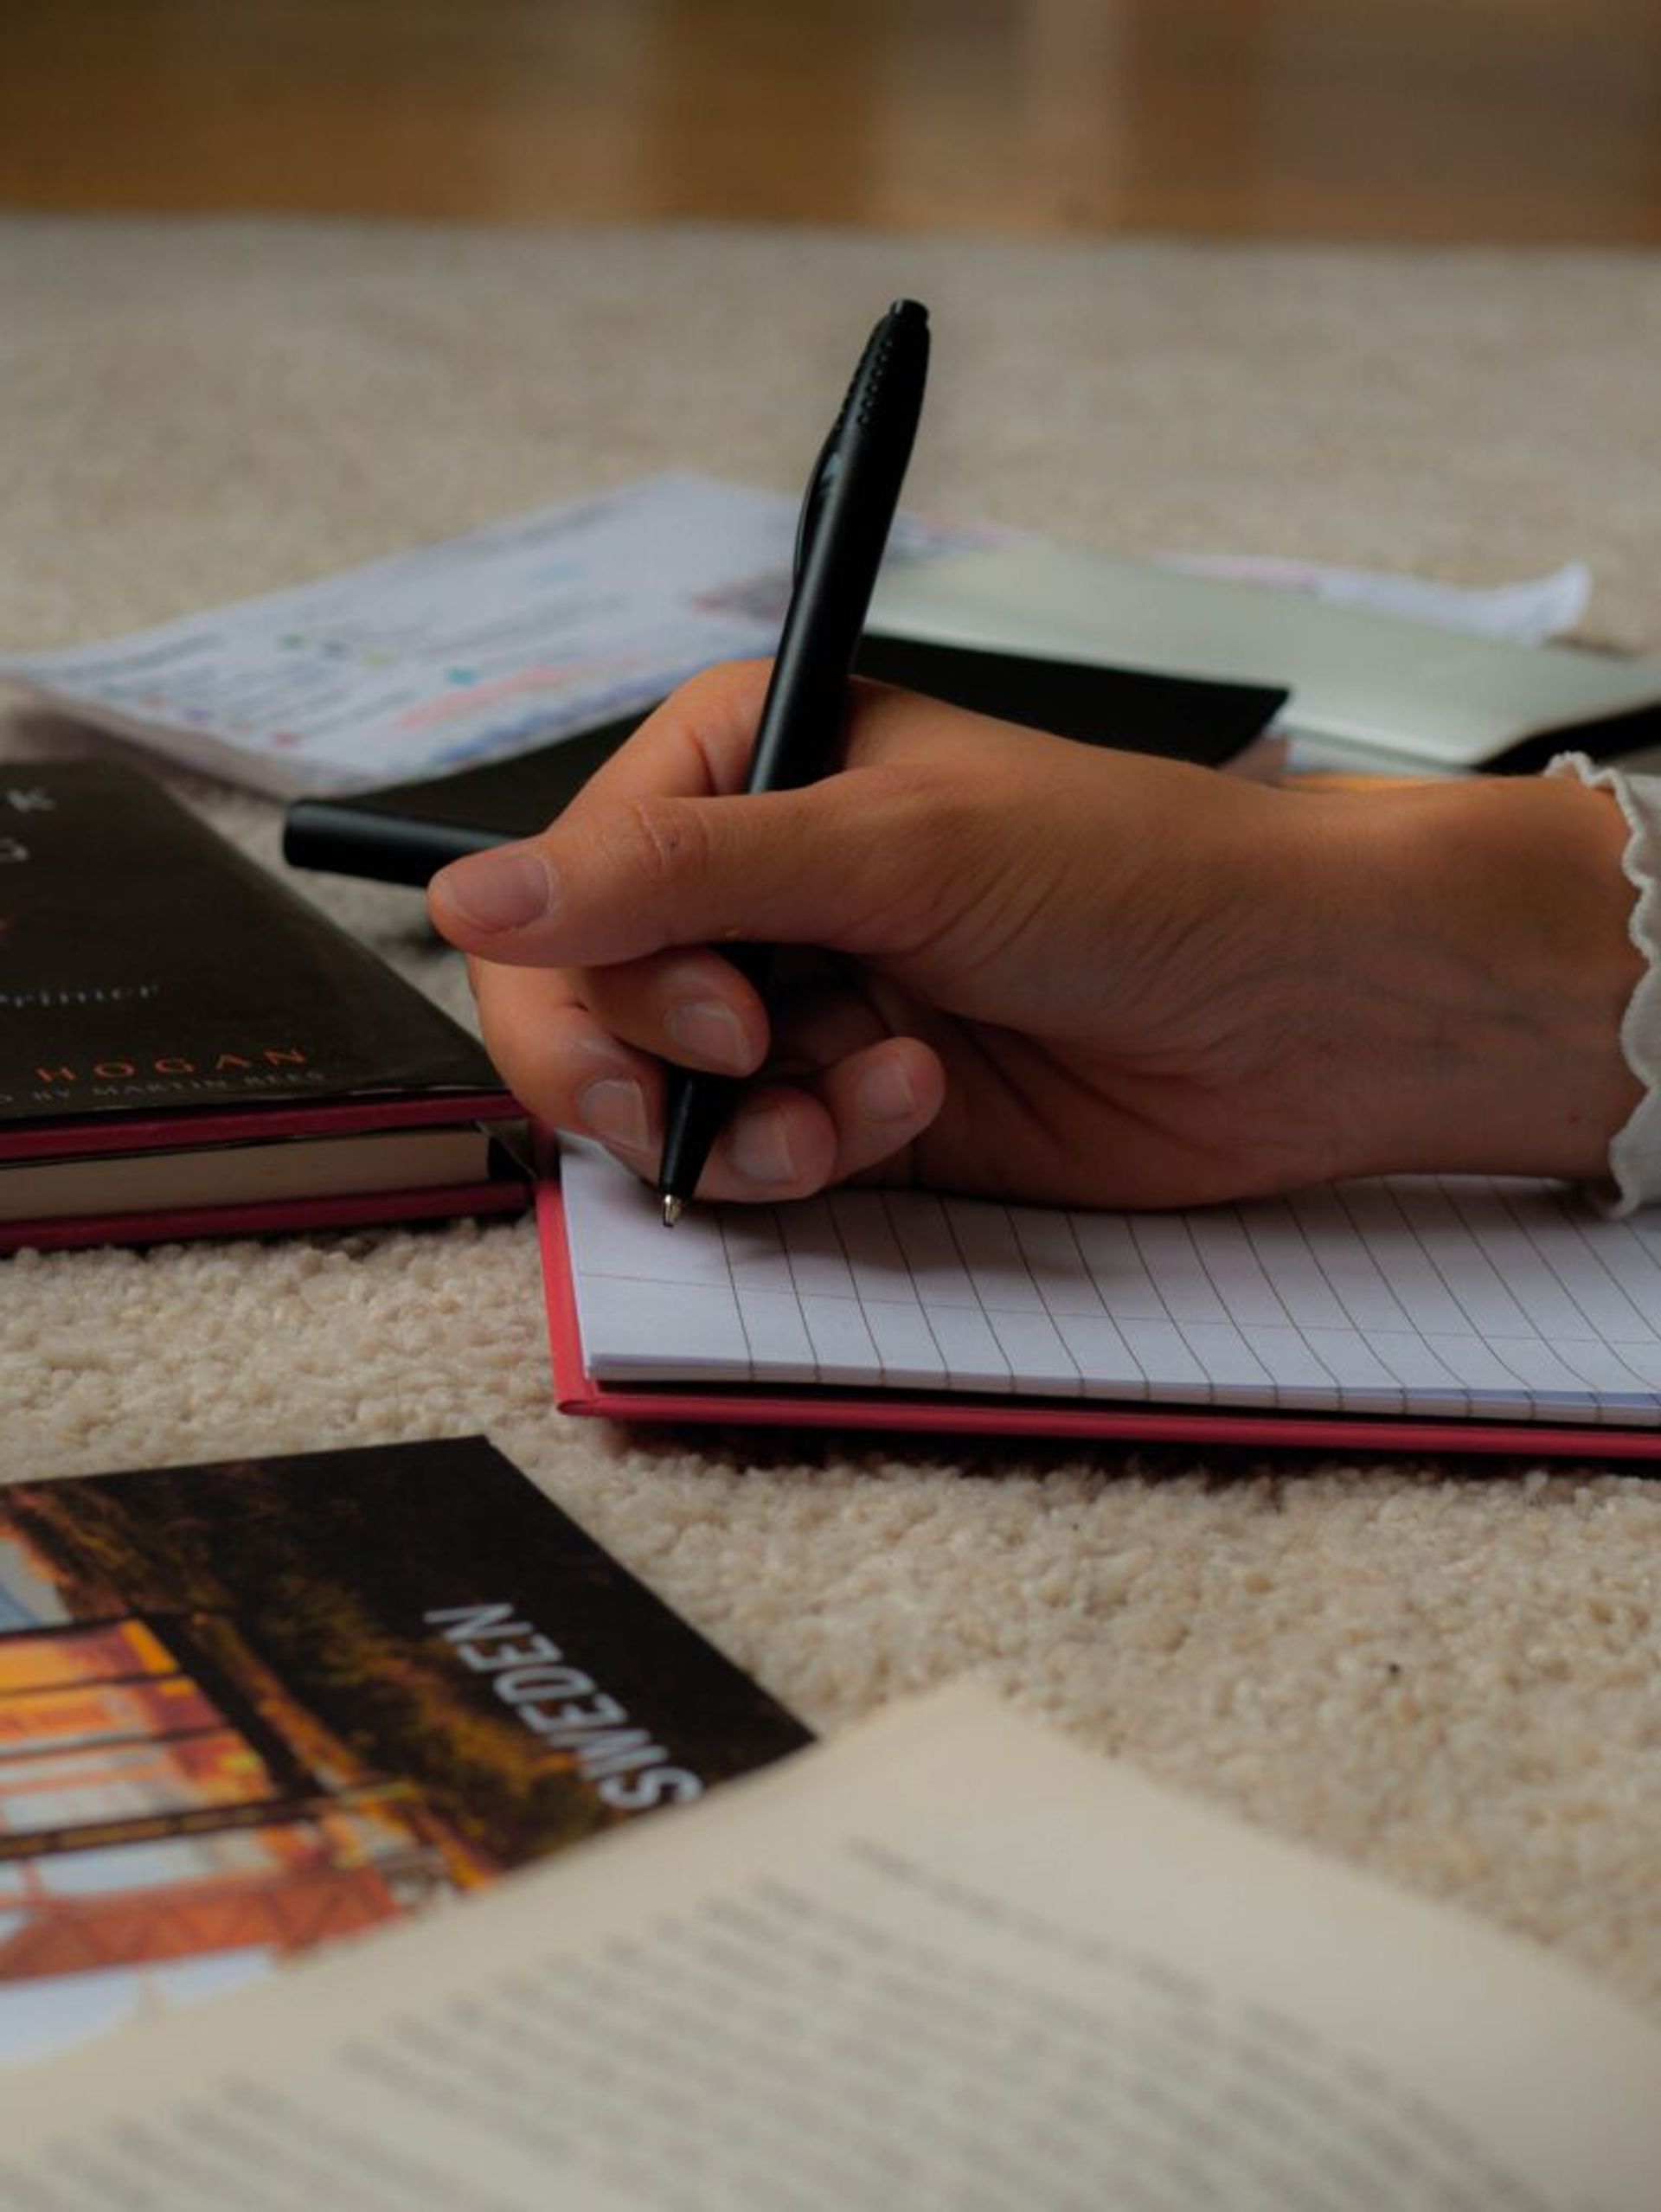 A hand holds a pen poised over a lined notebook, surrounded by study materials.